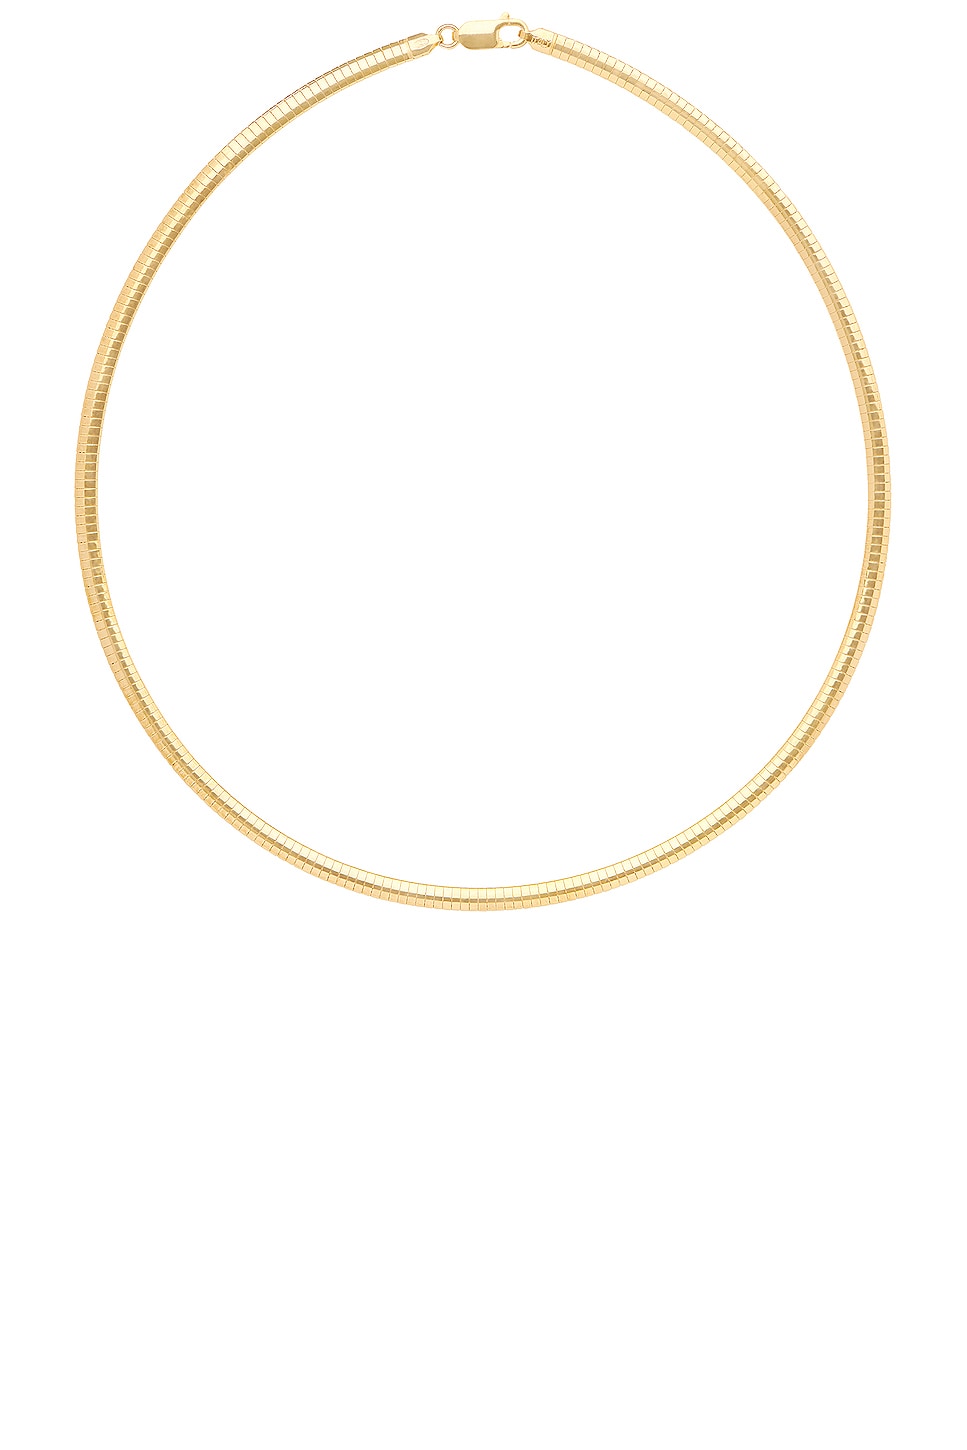 Image 1 of MEGA Omega 4 Necklace in 14k Yellow Gold Plated